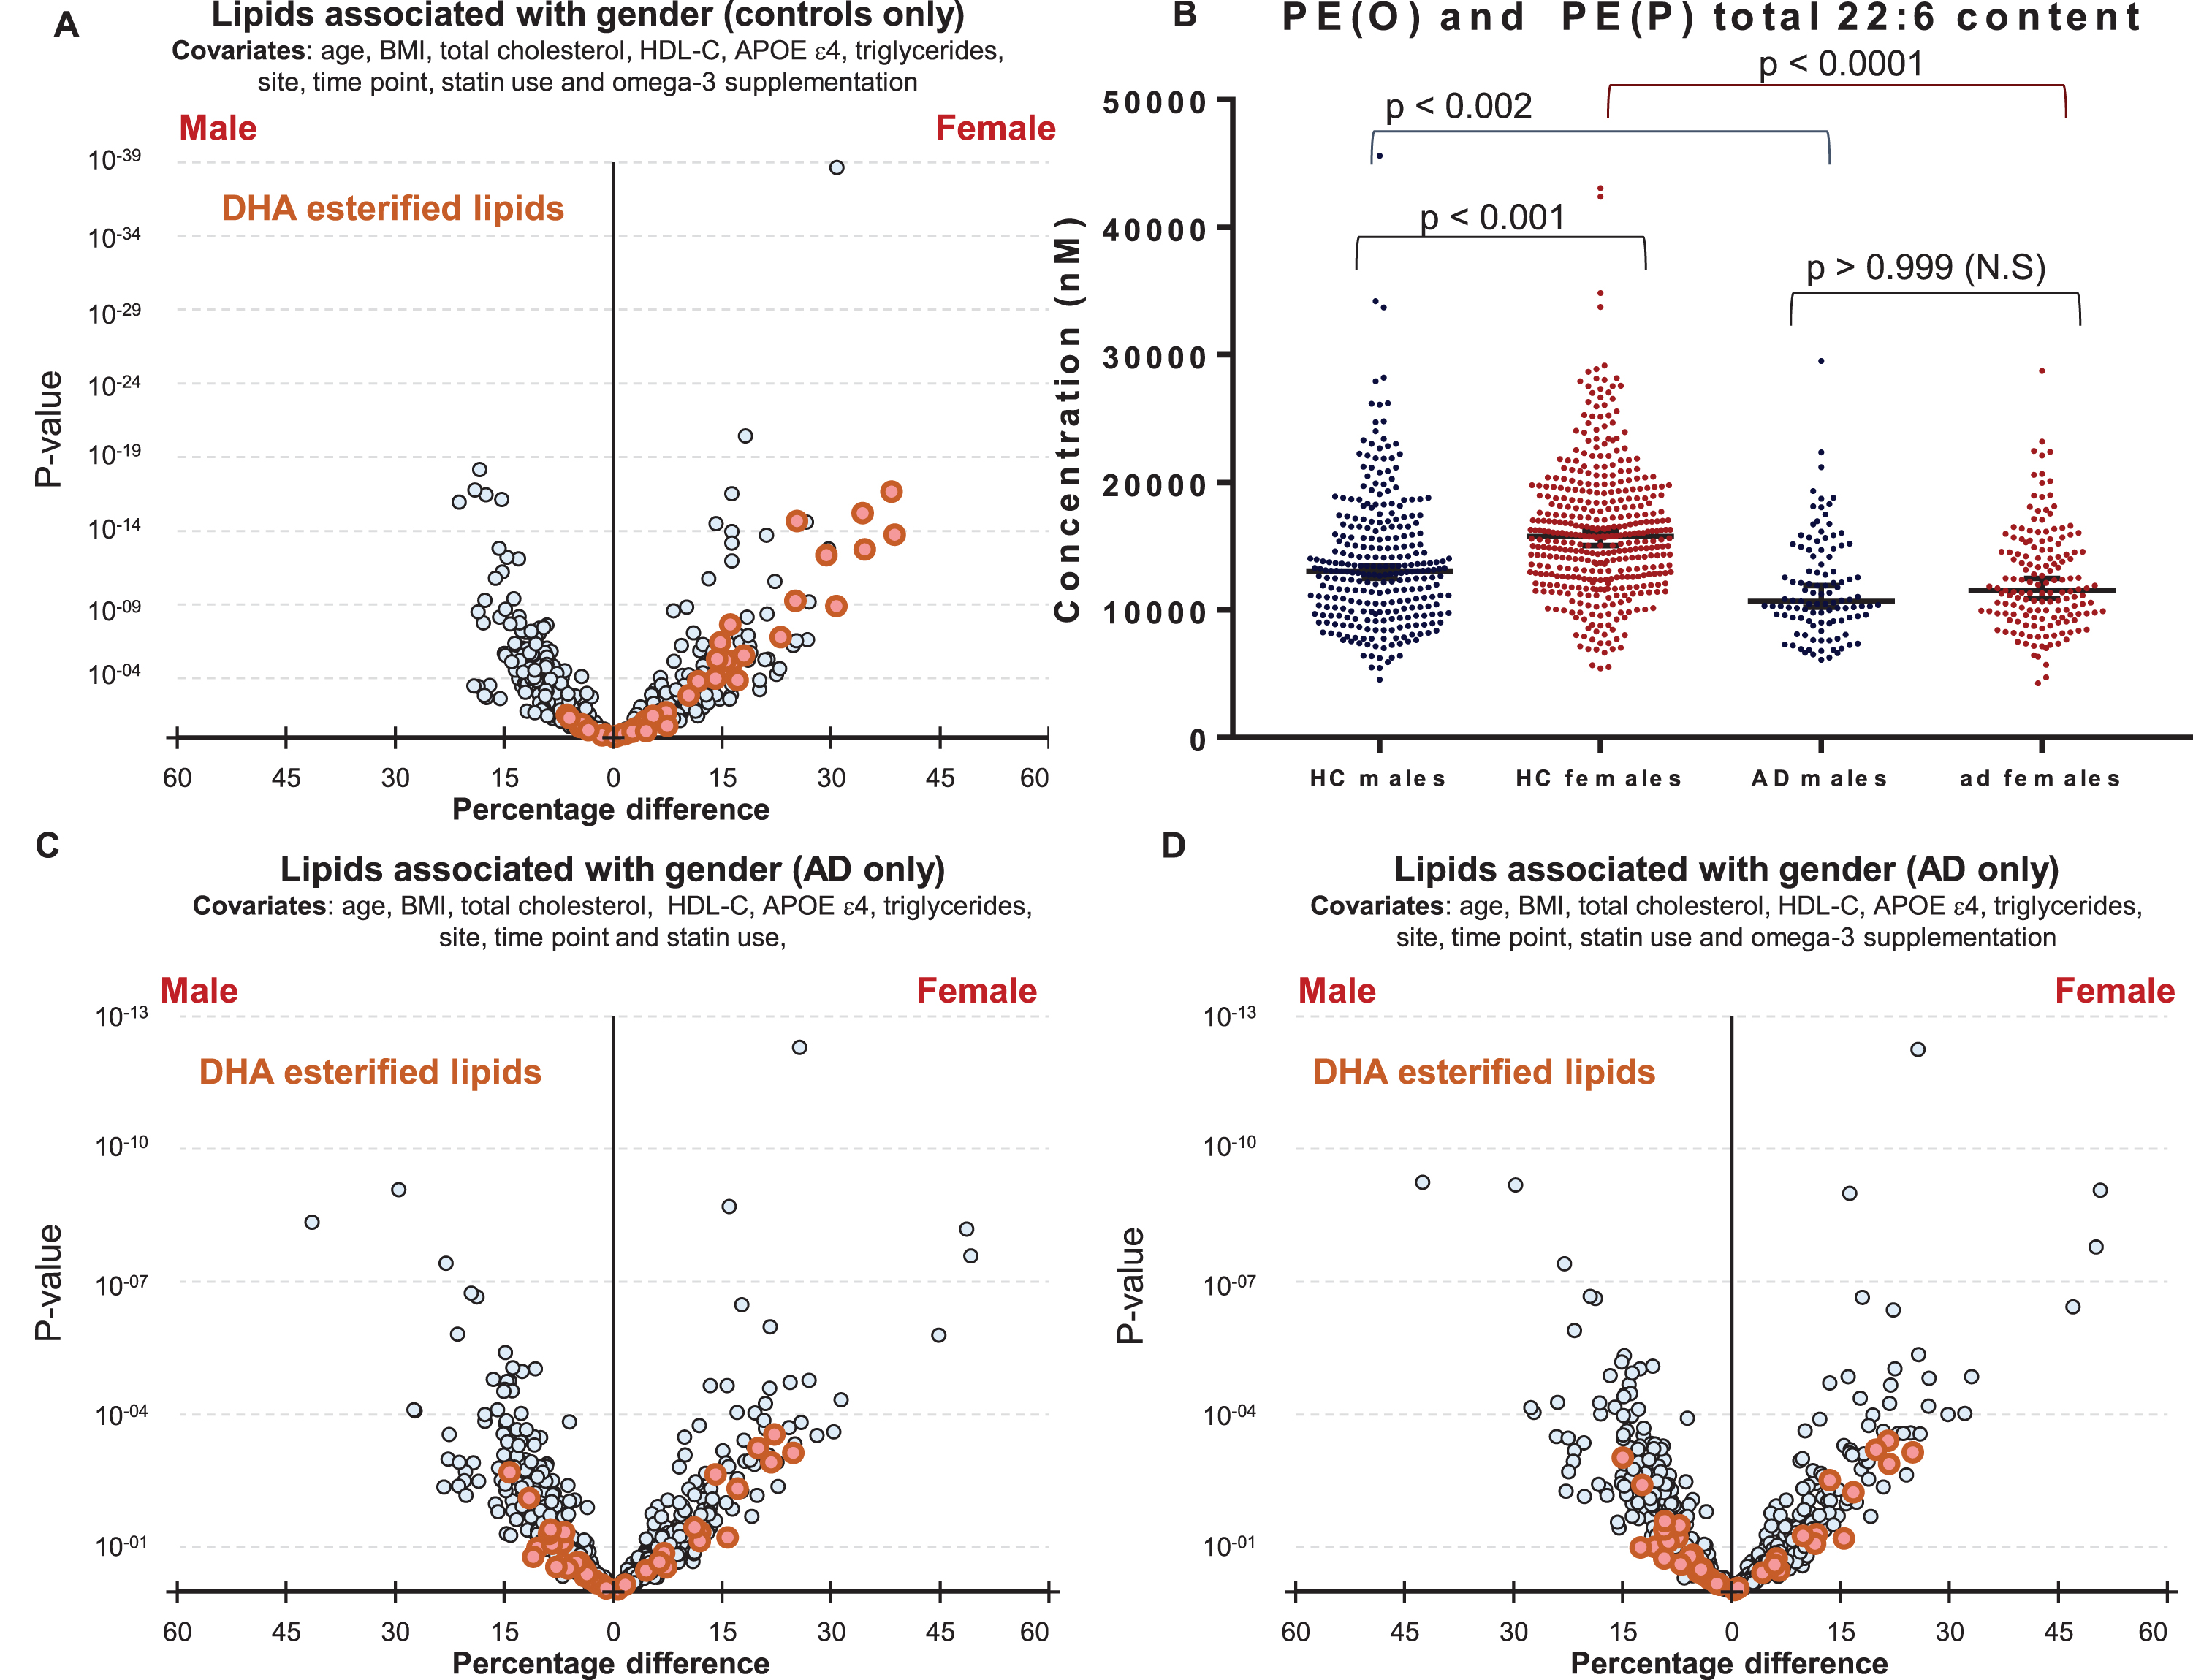 Associations of DHA containing lipid species with gender in control and Alzheimer’s disease groups. A) Linear regression of lipid species against gender, adjusting for clinical covariates, omega-3 supplementation and statin use using most recent samples of cognitively normal controls (n = 696). B) Concentrations of total PE(O) and PE(P) species esterified with a 22:6 fatty acid in cognitively normal males (n = 288) and females (n = 408), and in AD males (n = 109) and females (n = 159). p-values were obtained from a Dunn’s test after Kruskal-Wallis analysis. Black lines represent the median with 95% confidence intervals. C, D) Linear regression adjusting for clinical covariates using most recent samples of AD individuals (n = 268). C) No adjustment for omega-3 supplementation. D) Adjusted for omega-3 supplementation.